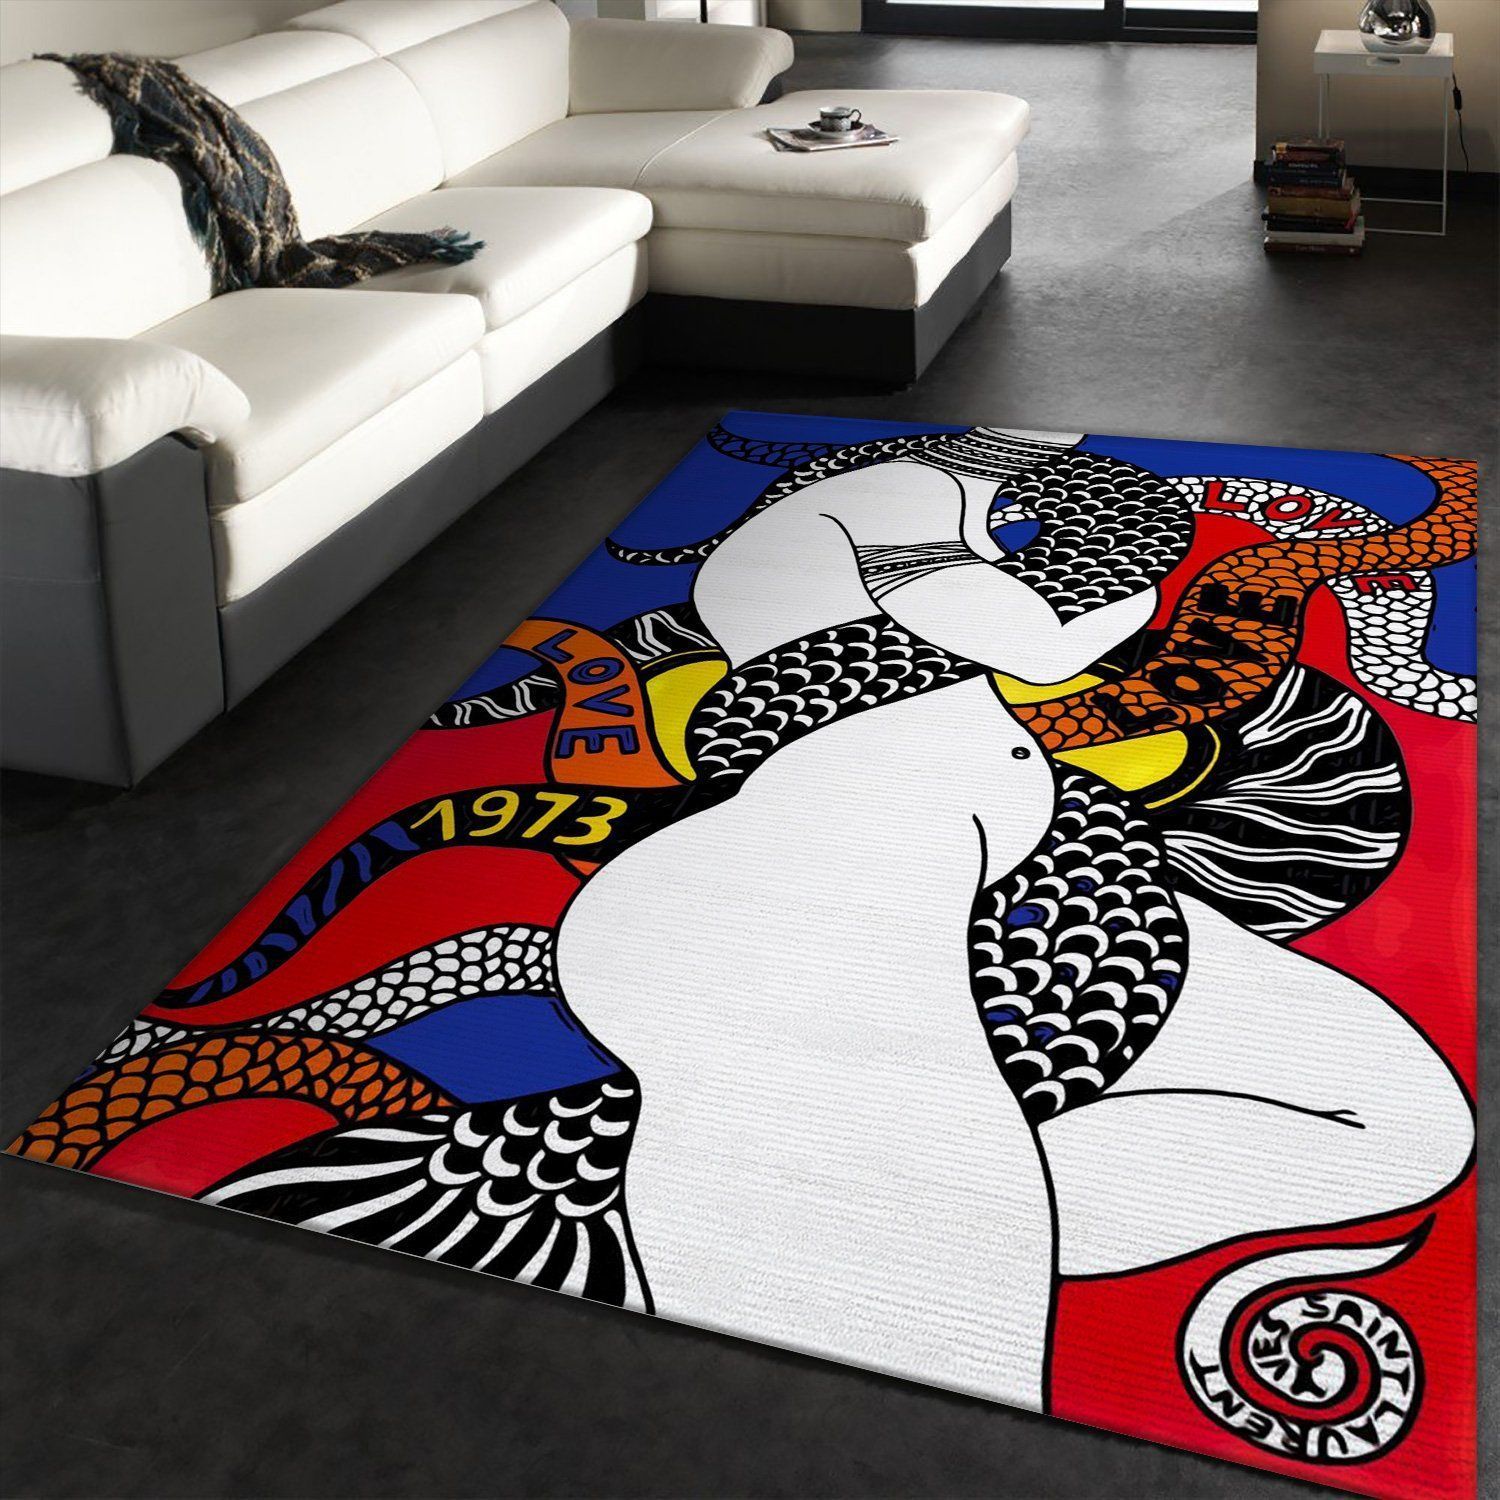 Ysl Vintage Love Poster Area Rugs Living Room Rug Christmas Gift US Decor - Indoor Outdoor Rugs 1